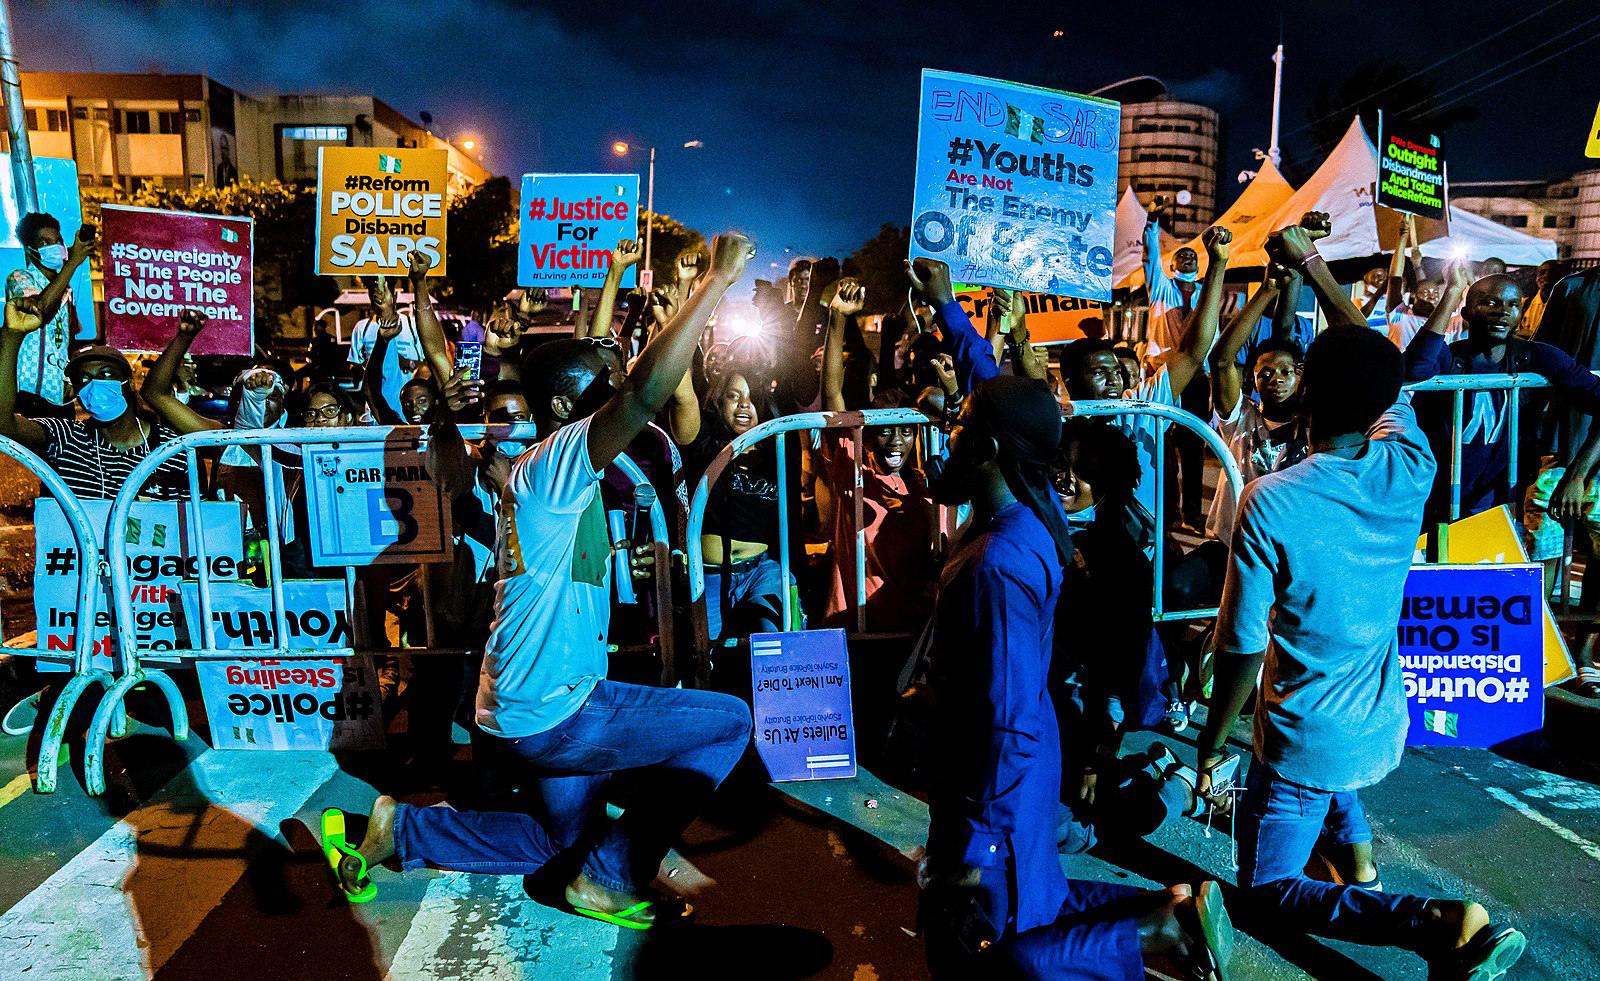 Protesters kneel in the street holding signs aloft at night